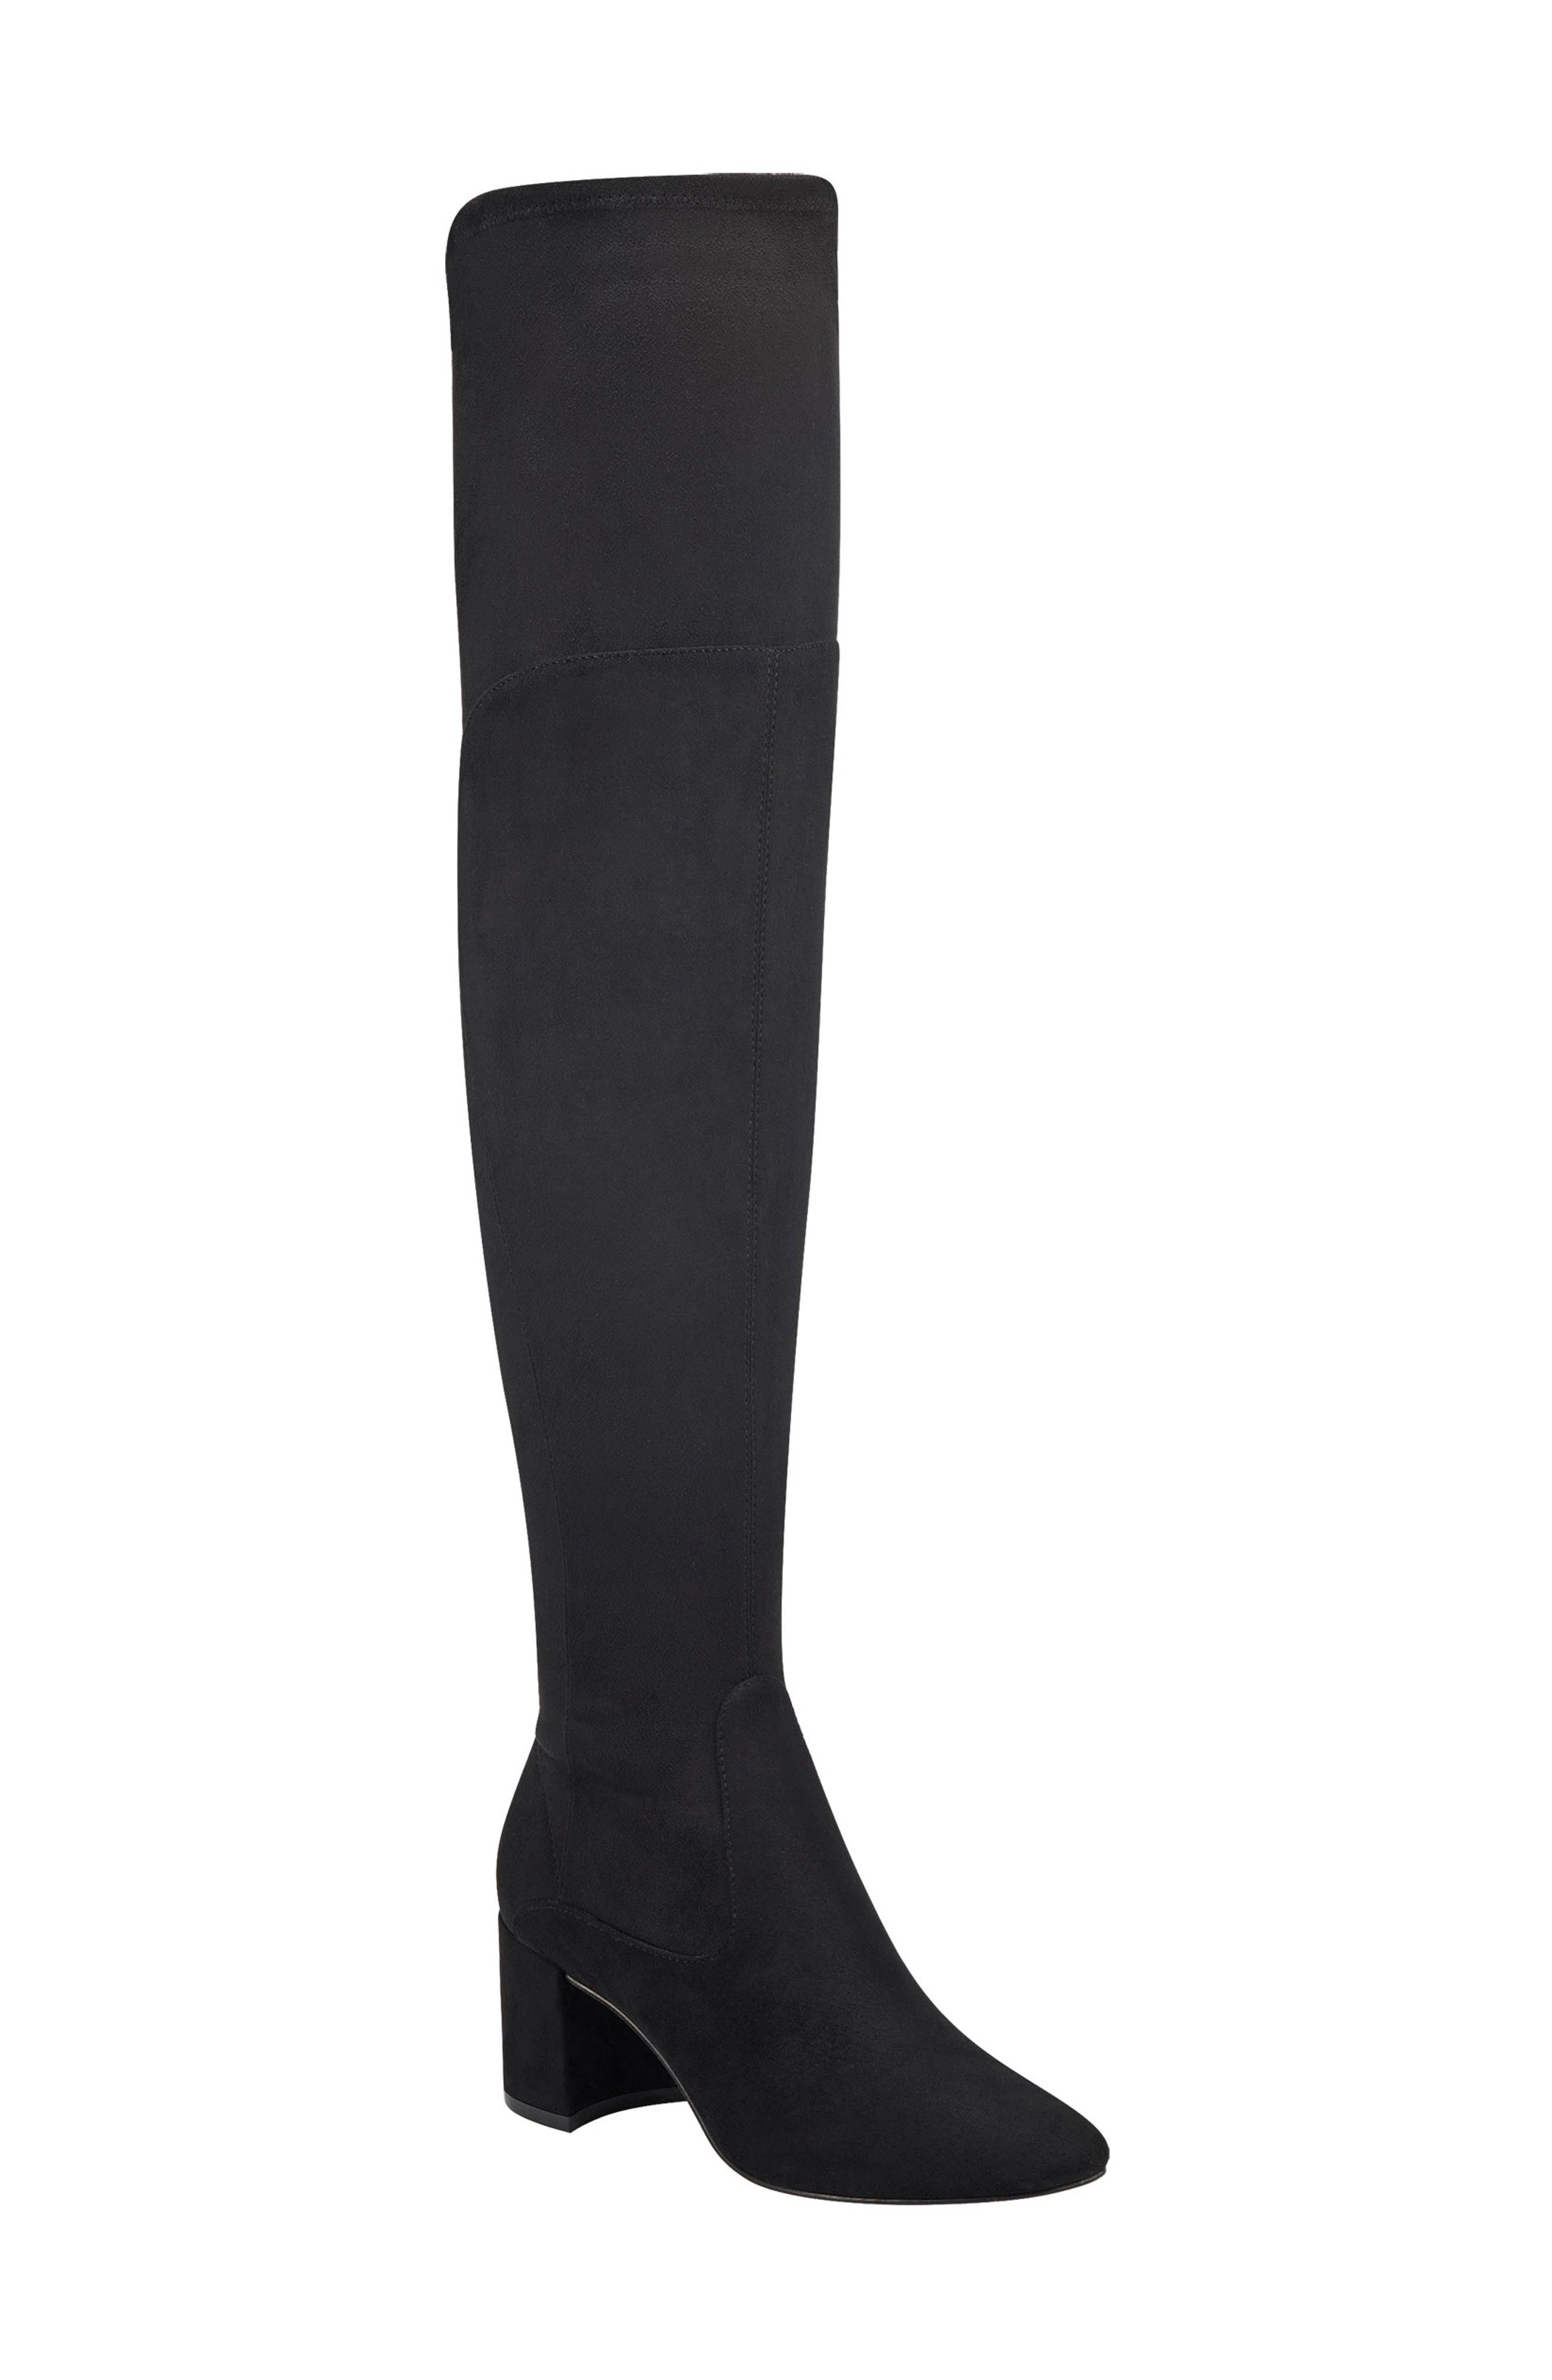 marc fisher black over the knee boots